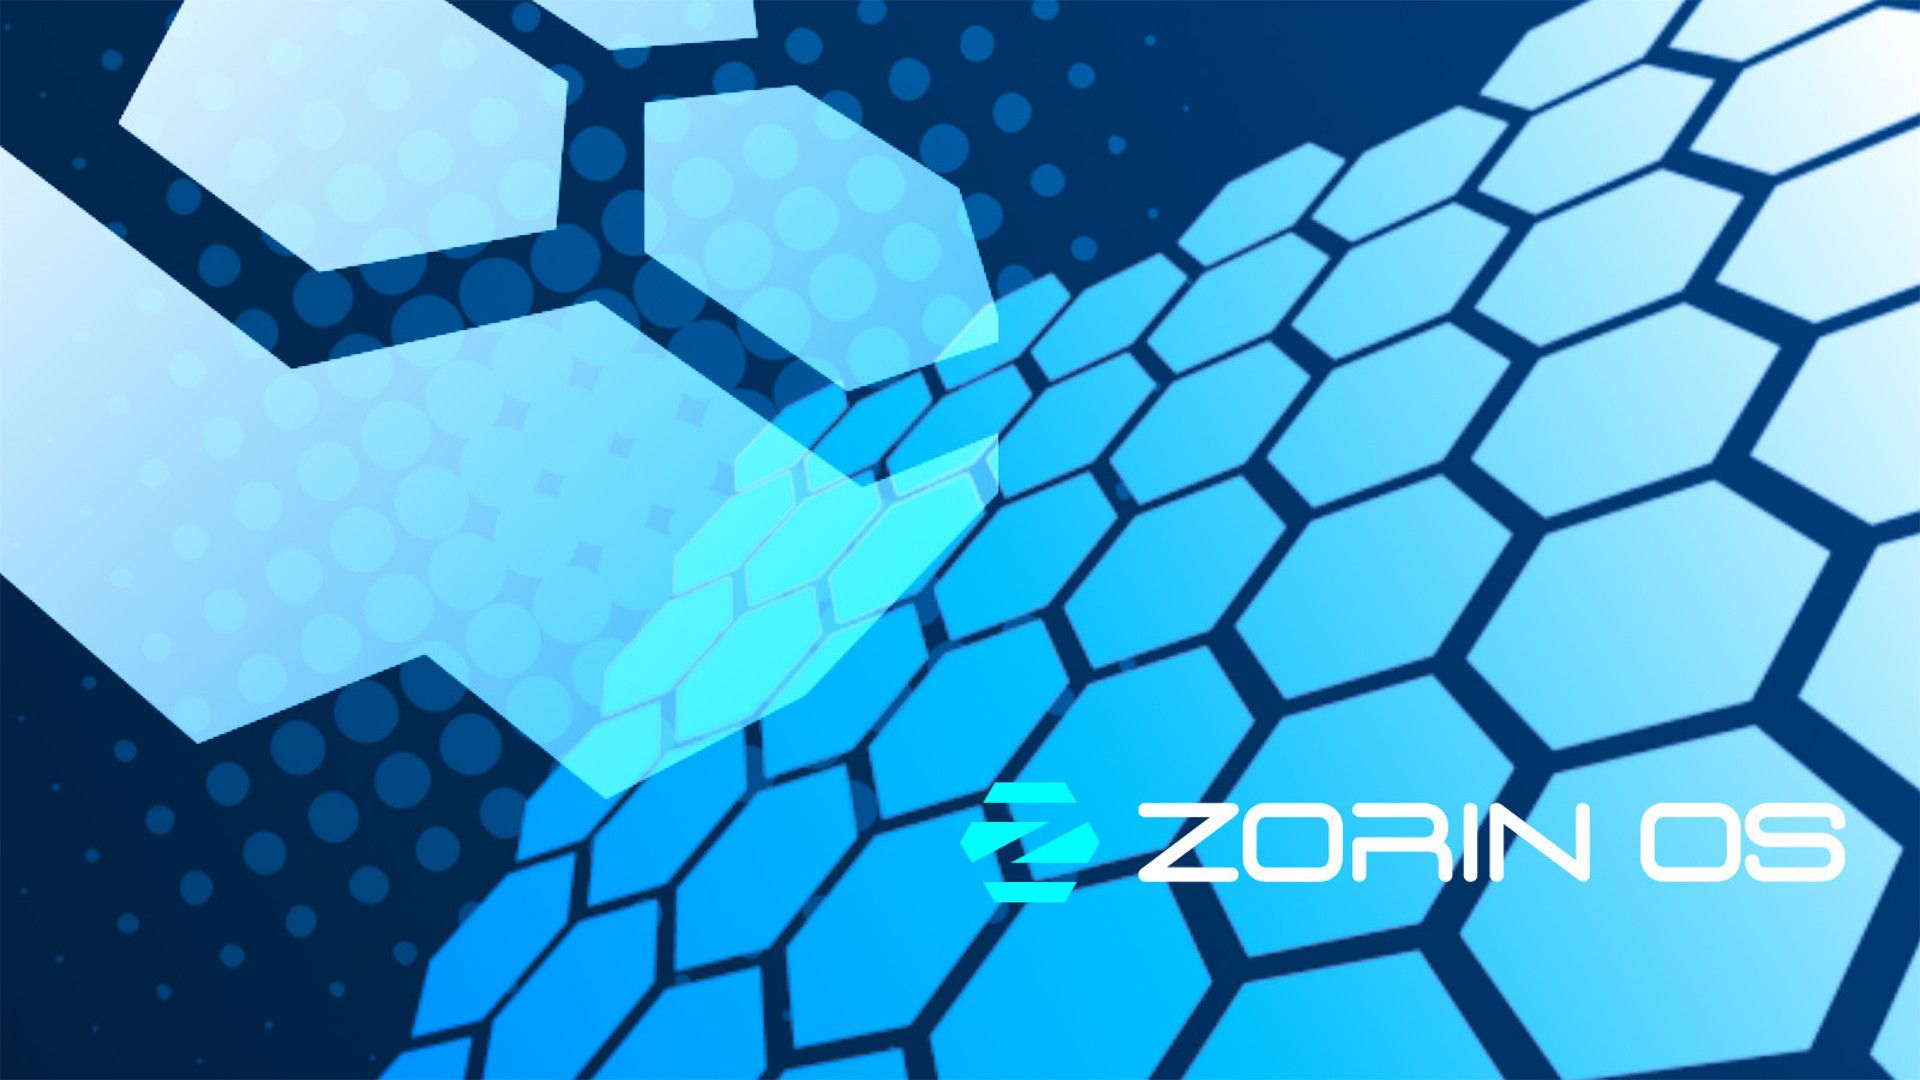 Images Wallpapers zorin os computer 19201080 11407